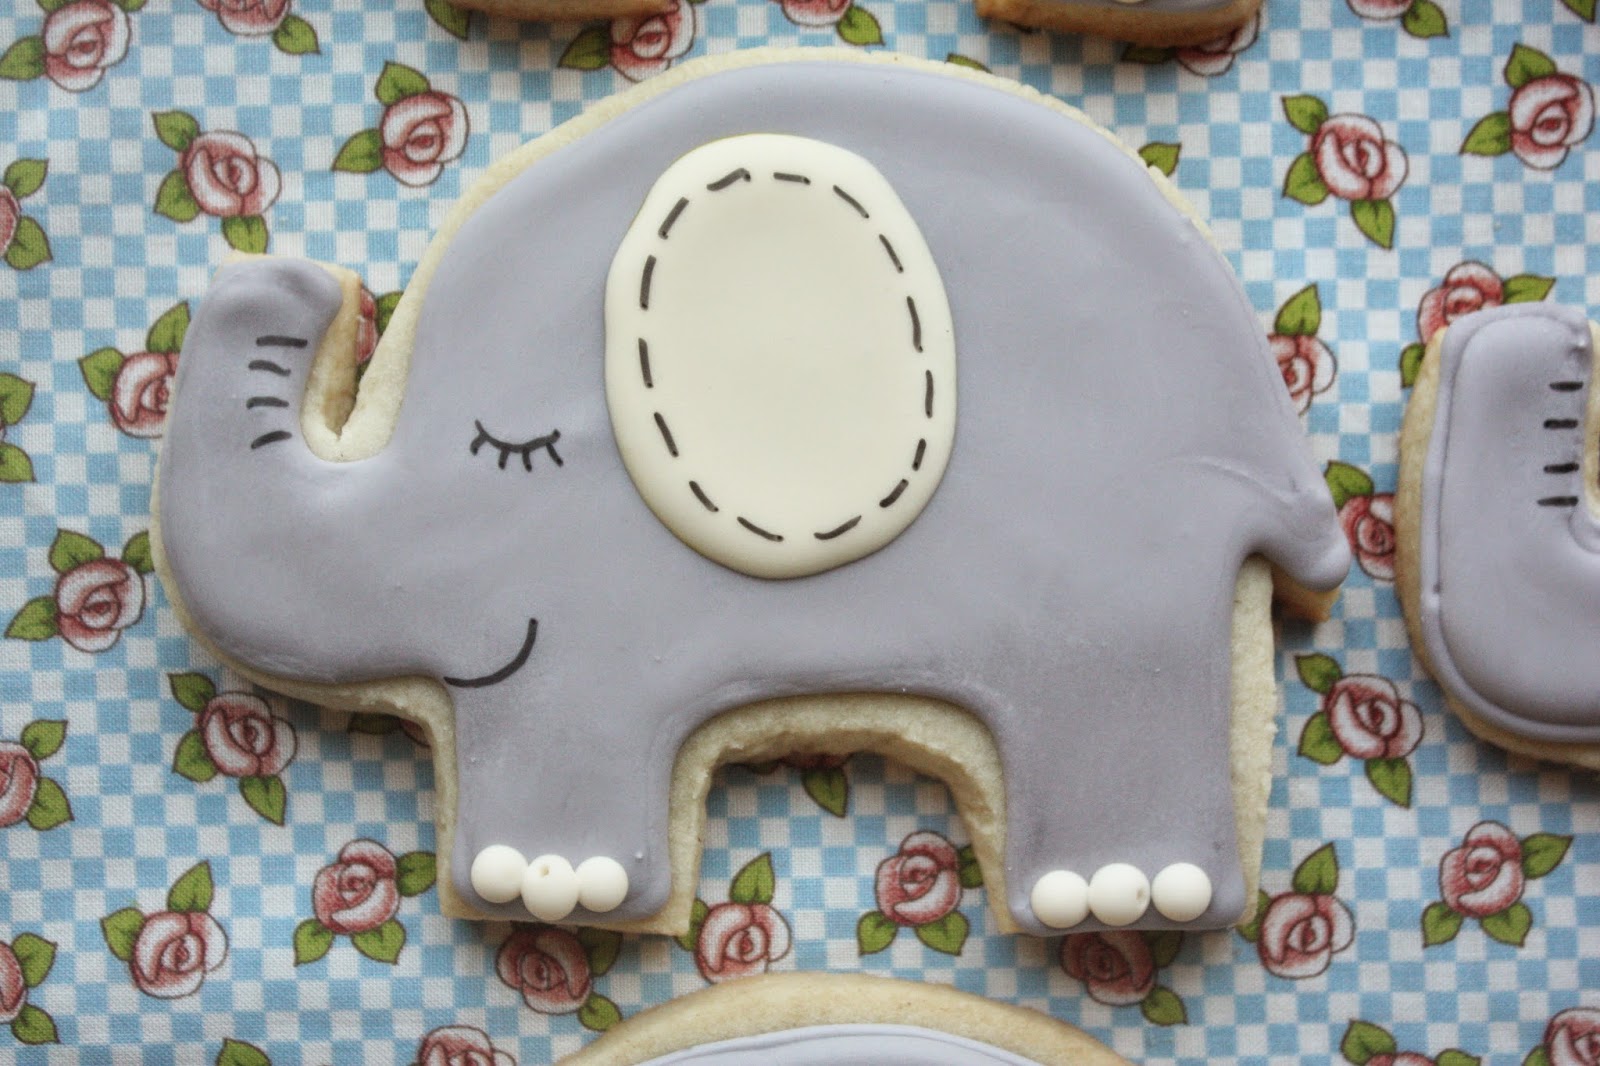 Elephant Cookies and Simply Perfect Party Cakes for Kids, Lay The Table